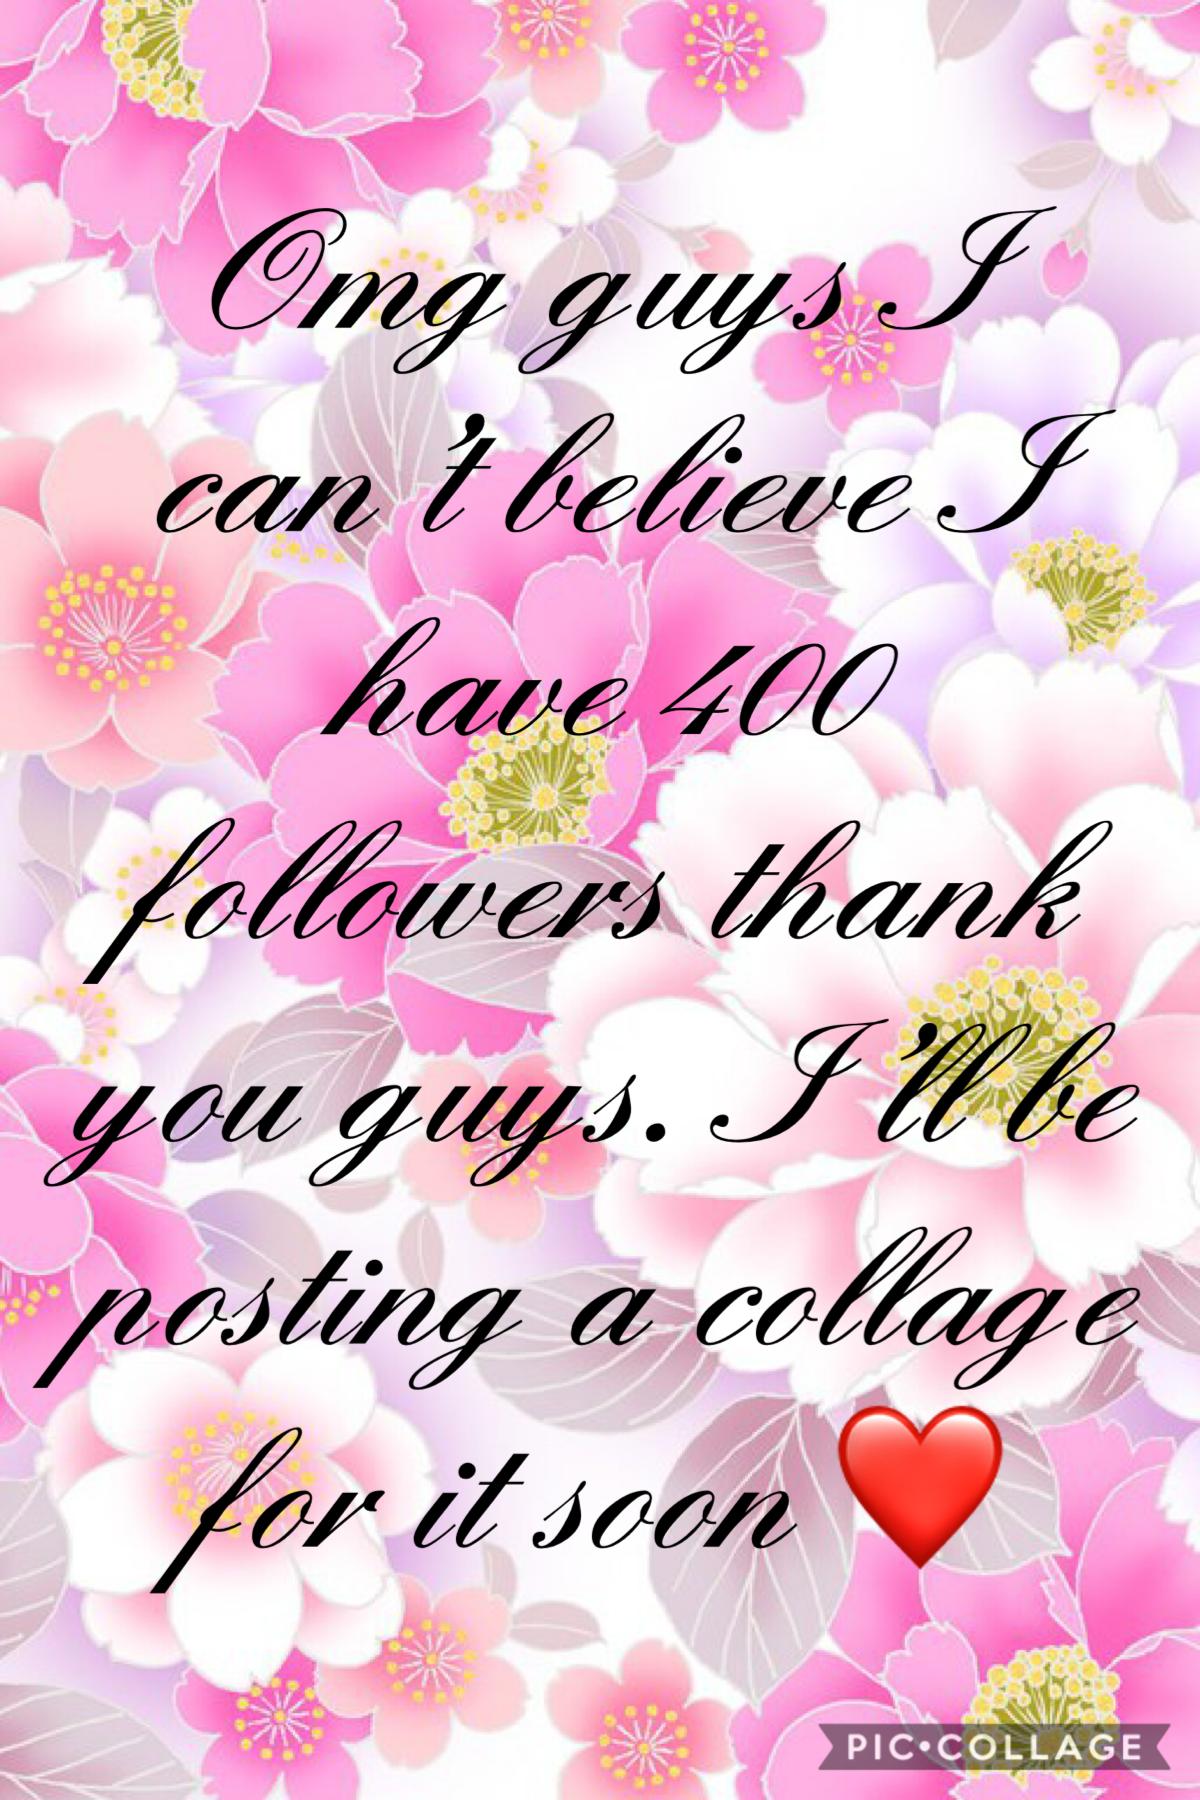 Thank you so much I love you guys 